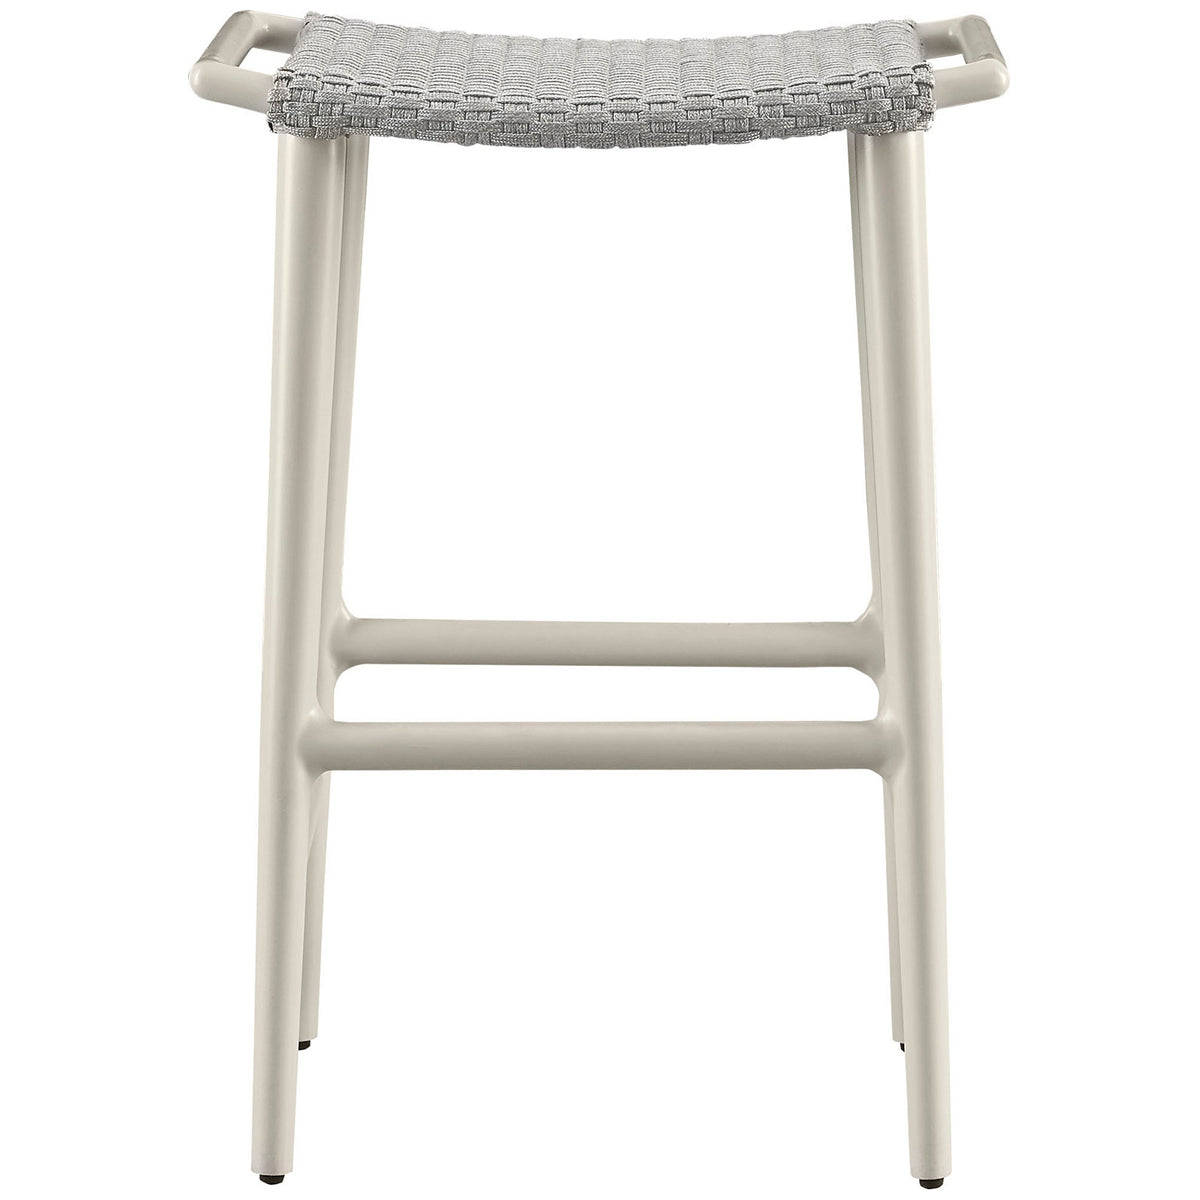 Baker Furniture Bow Outdoor Barstool MCO3347